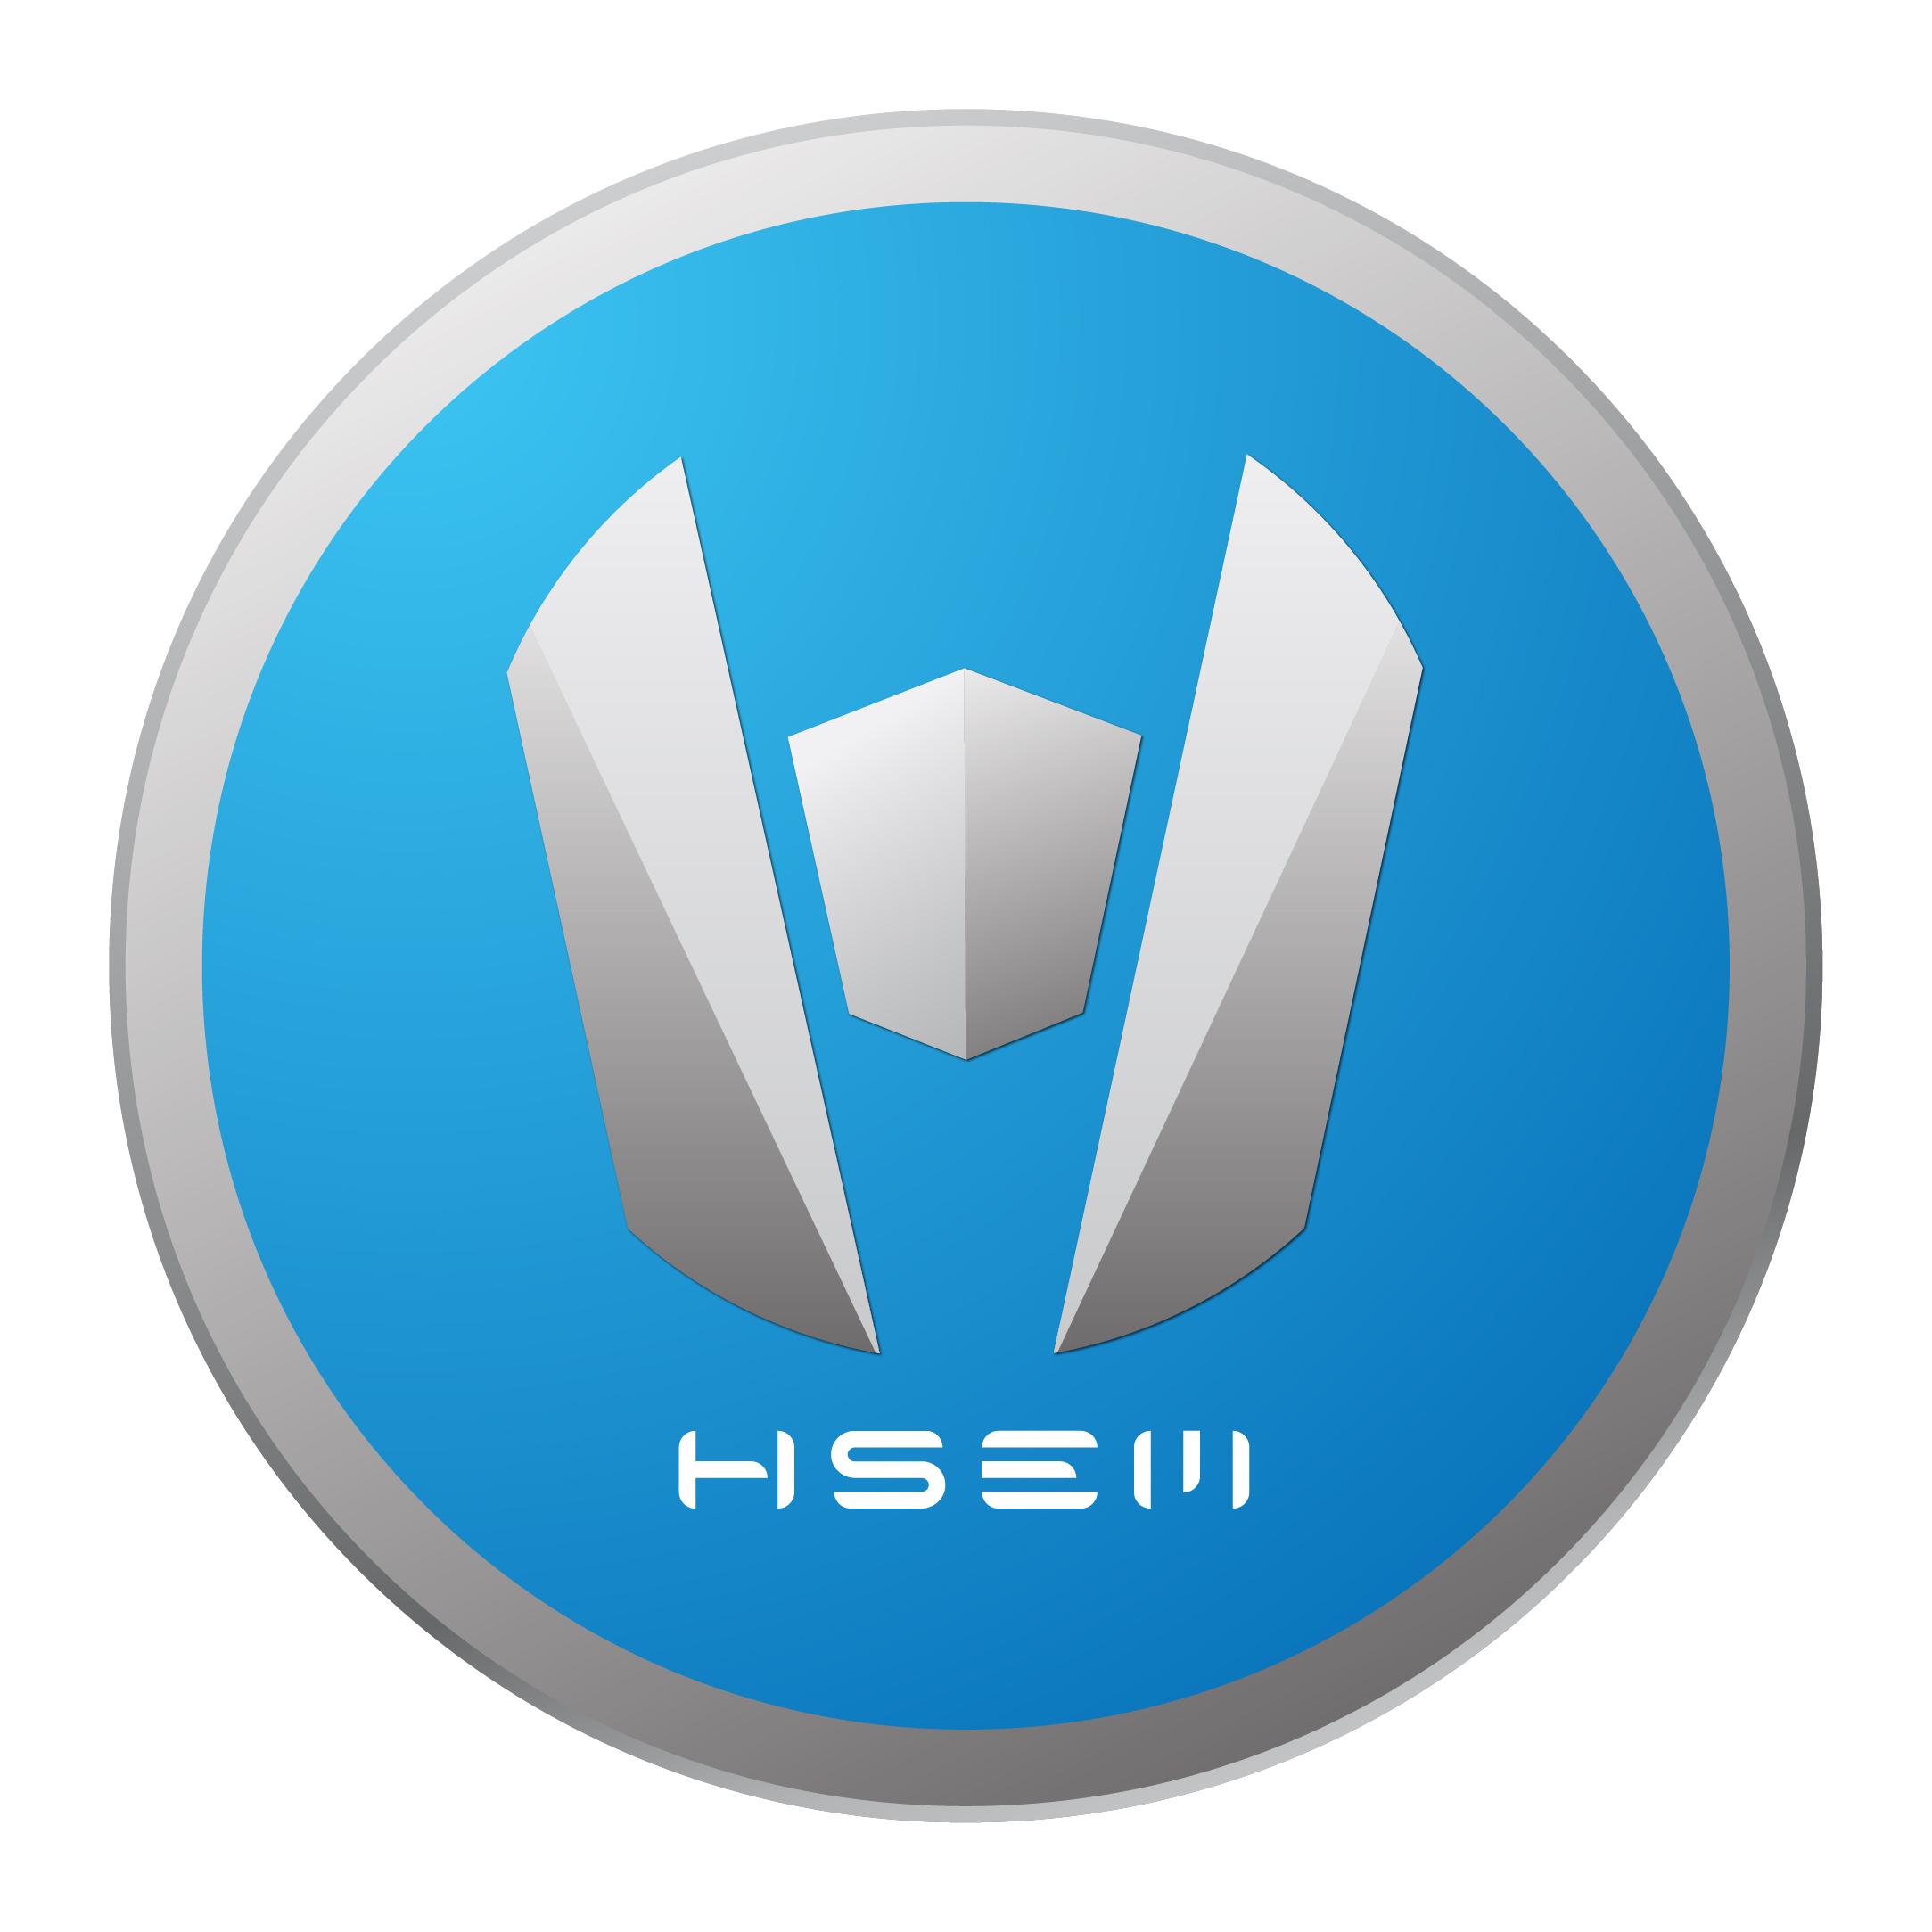 H SEM MOTOR Unveils New Logo Reflecting Brands Solidity, Clarity and Modernity